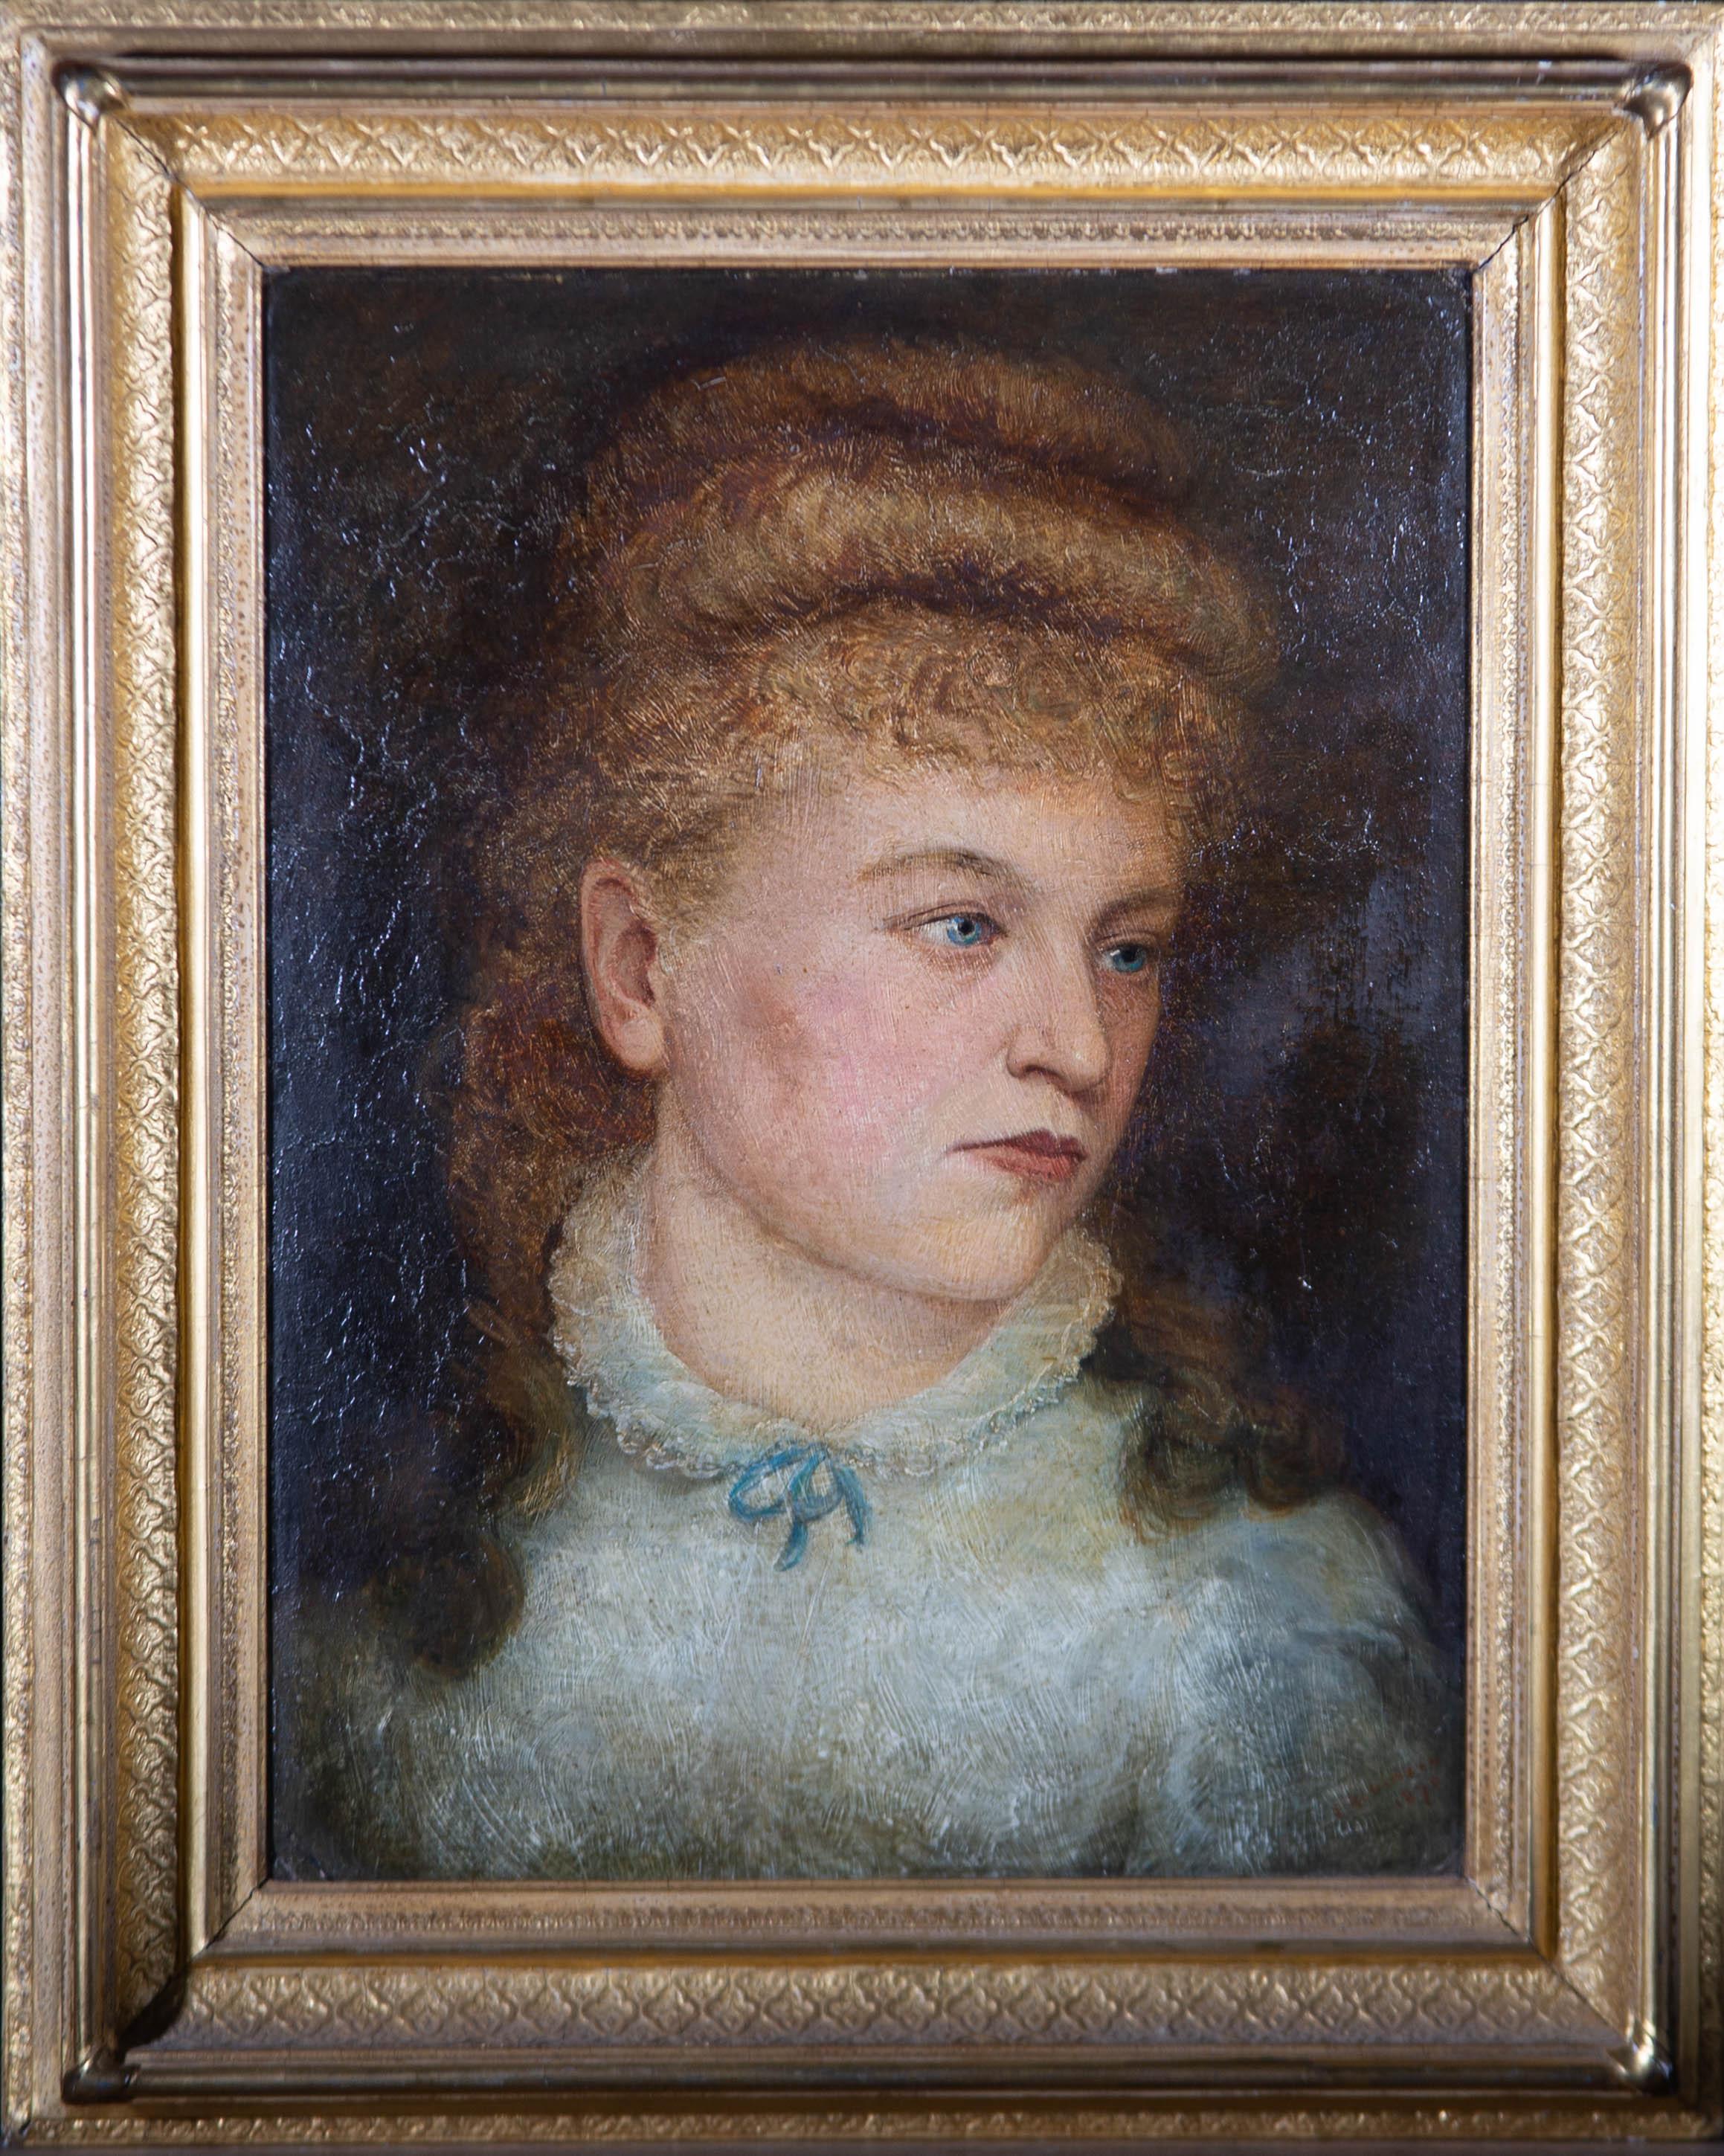 A fine oil portrait of a rosy cheeked, young Victorian woman wearing a white lace collared dress with a blue ribbon. The artist has signed and dated at the lower right corner. The painting has been presented in a beautiful Victorian cassetta style